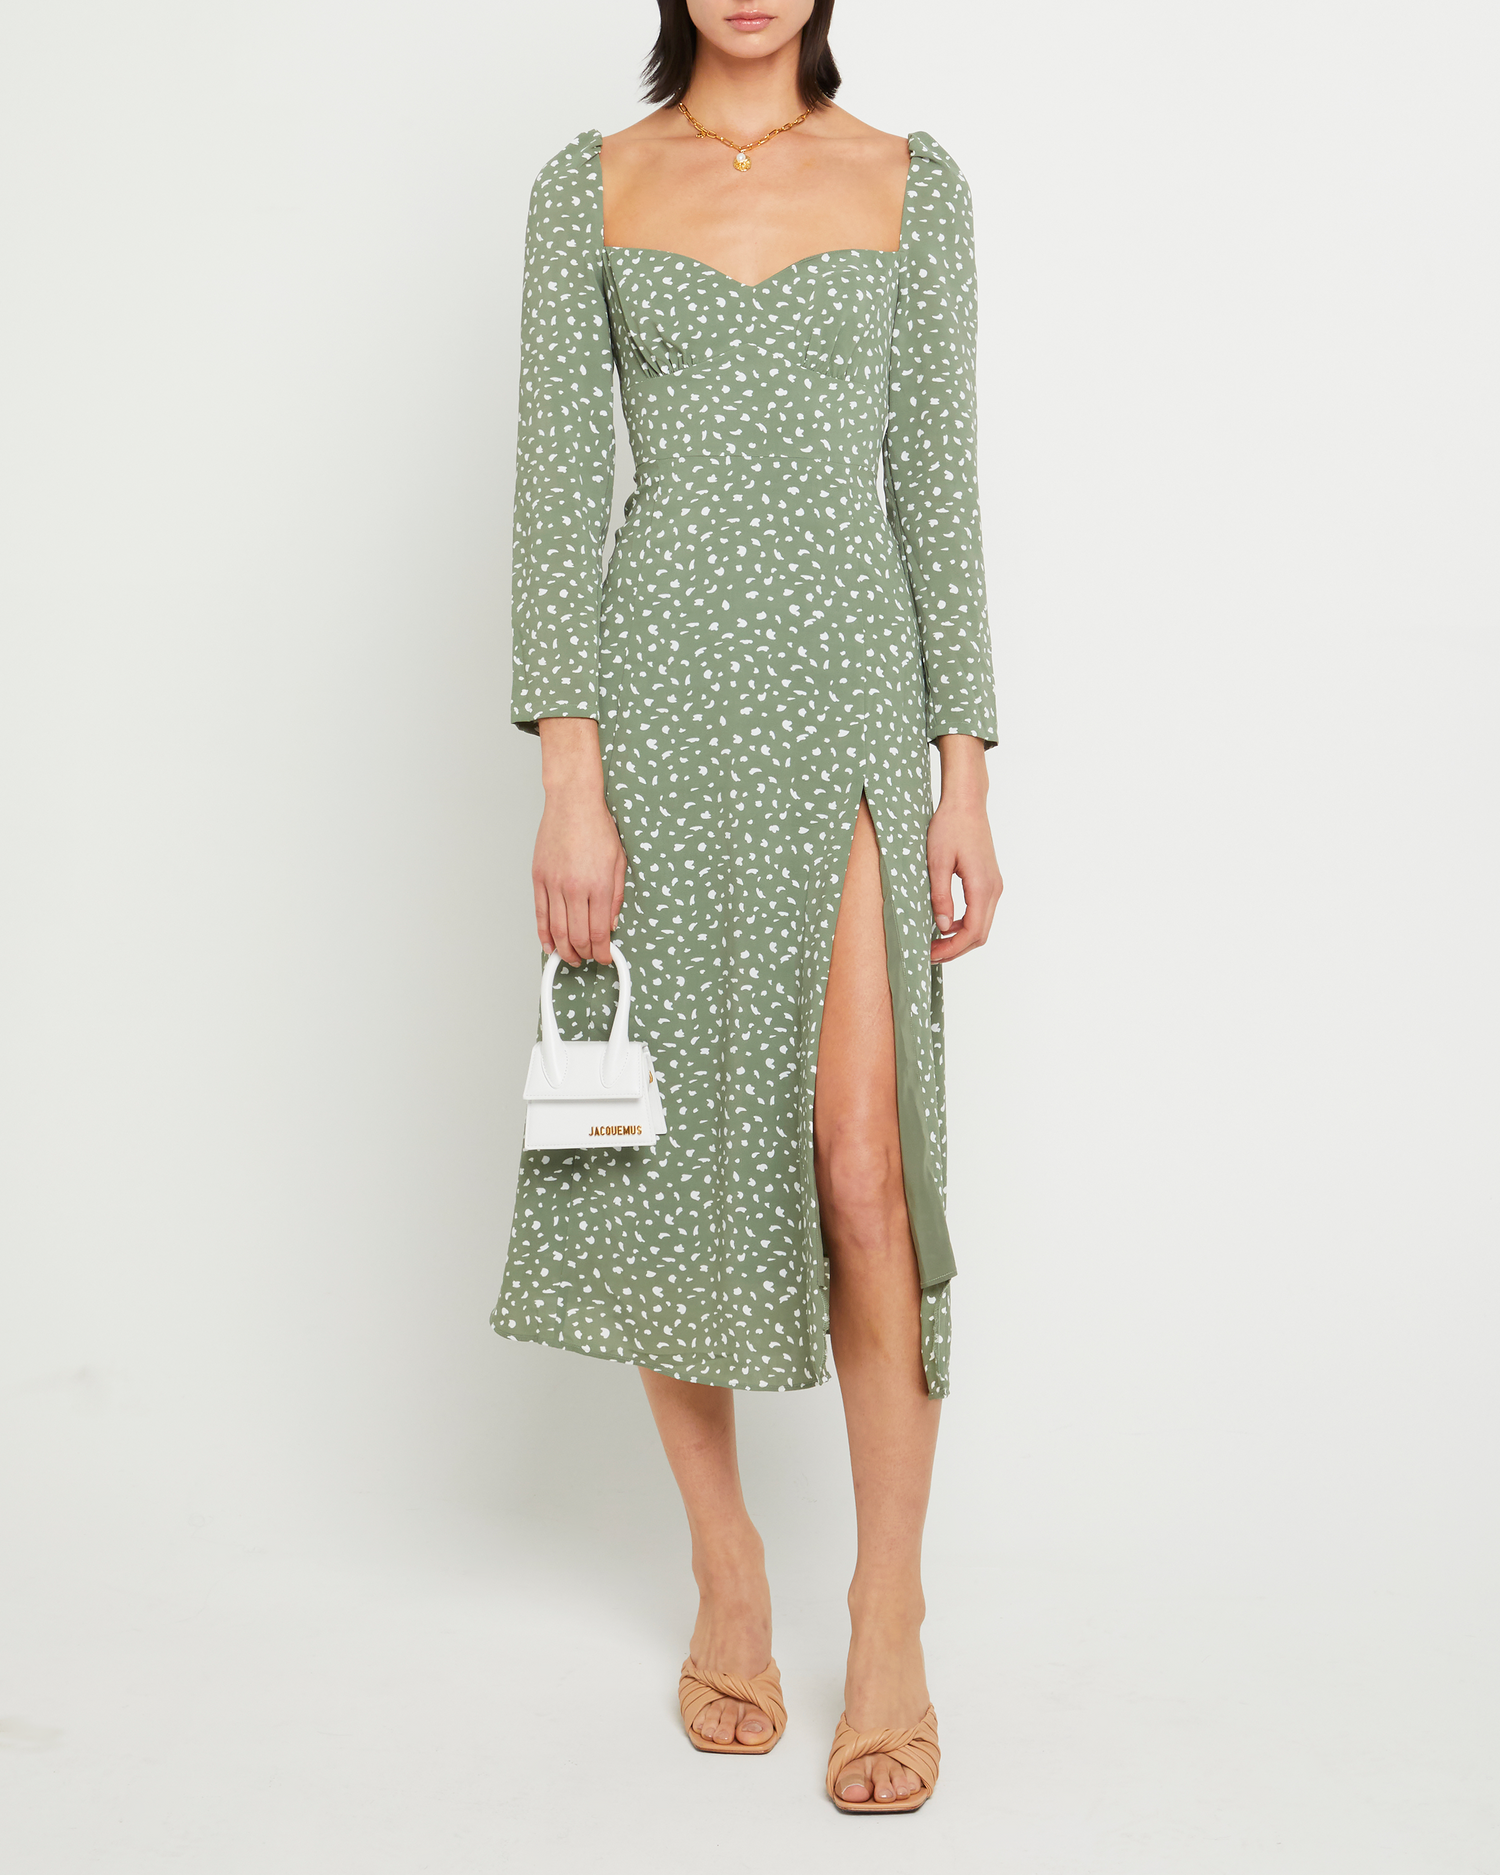 First image of Crimini Dress, a green midi dress, sweetheart neckline, floral, long sleeves, fitted